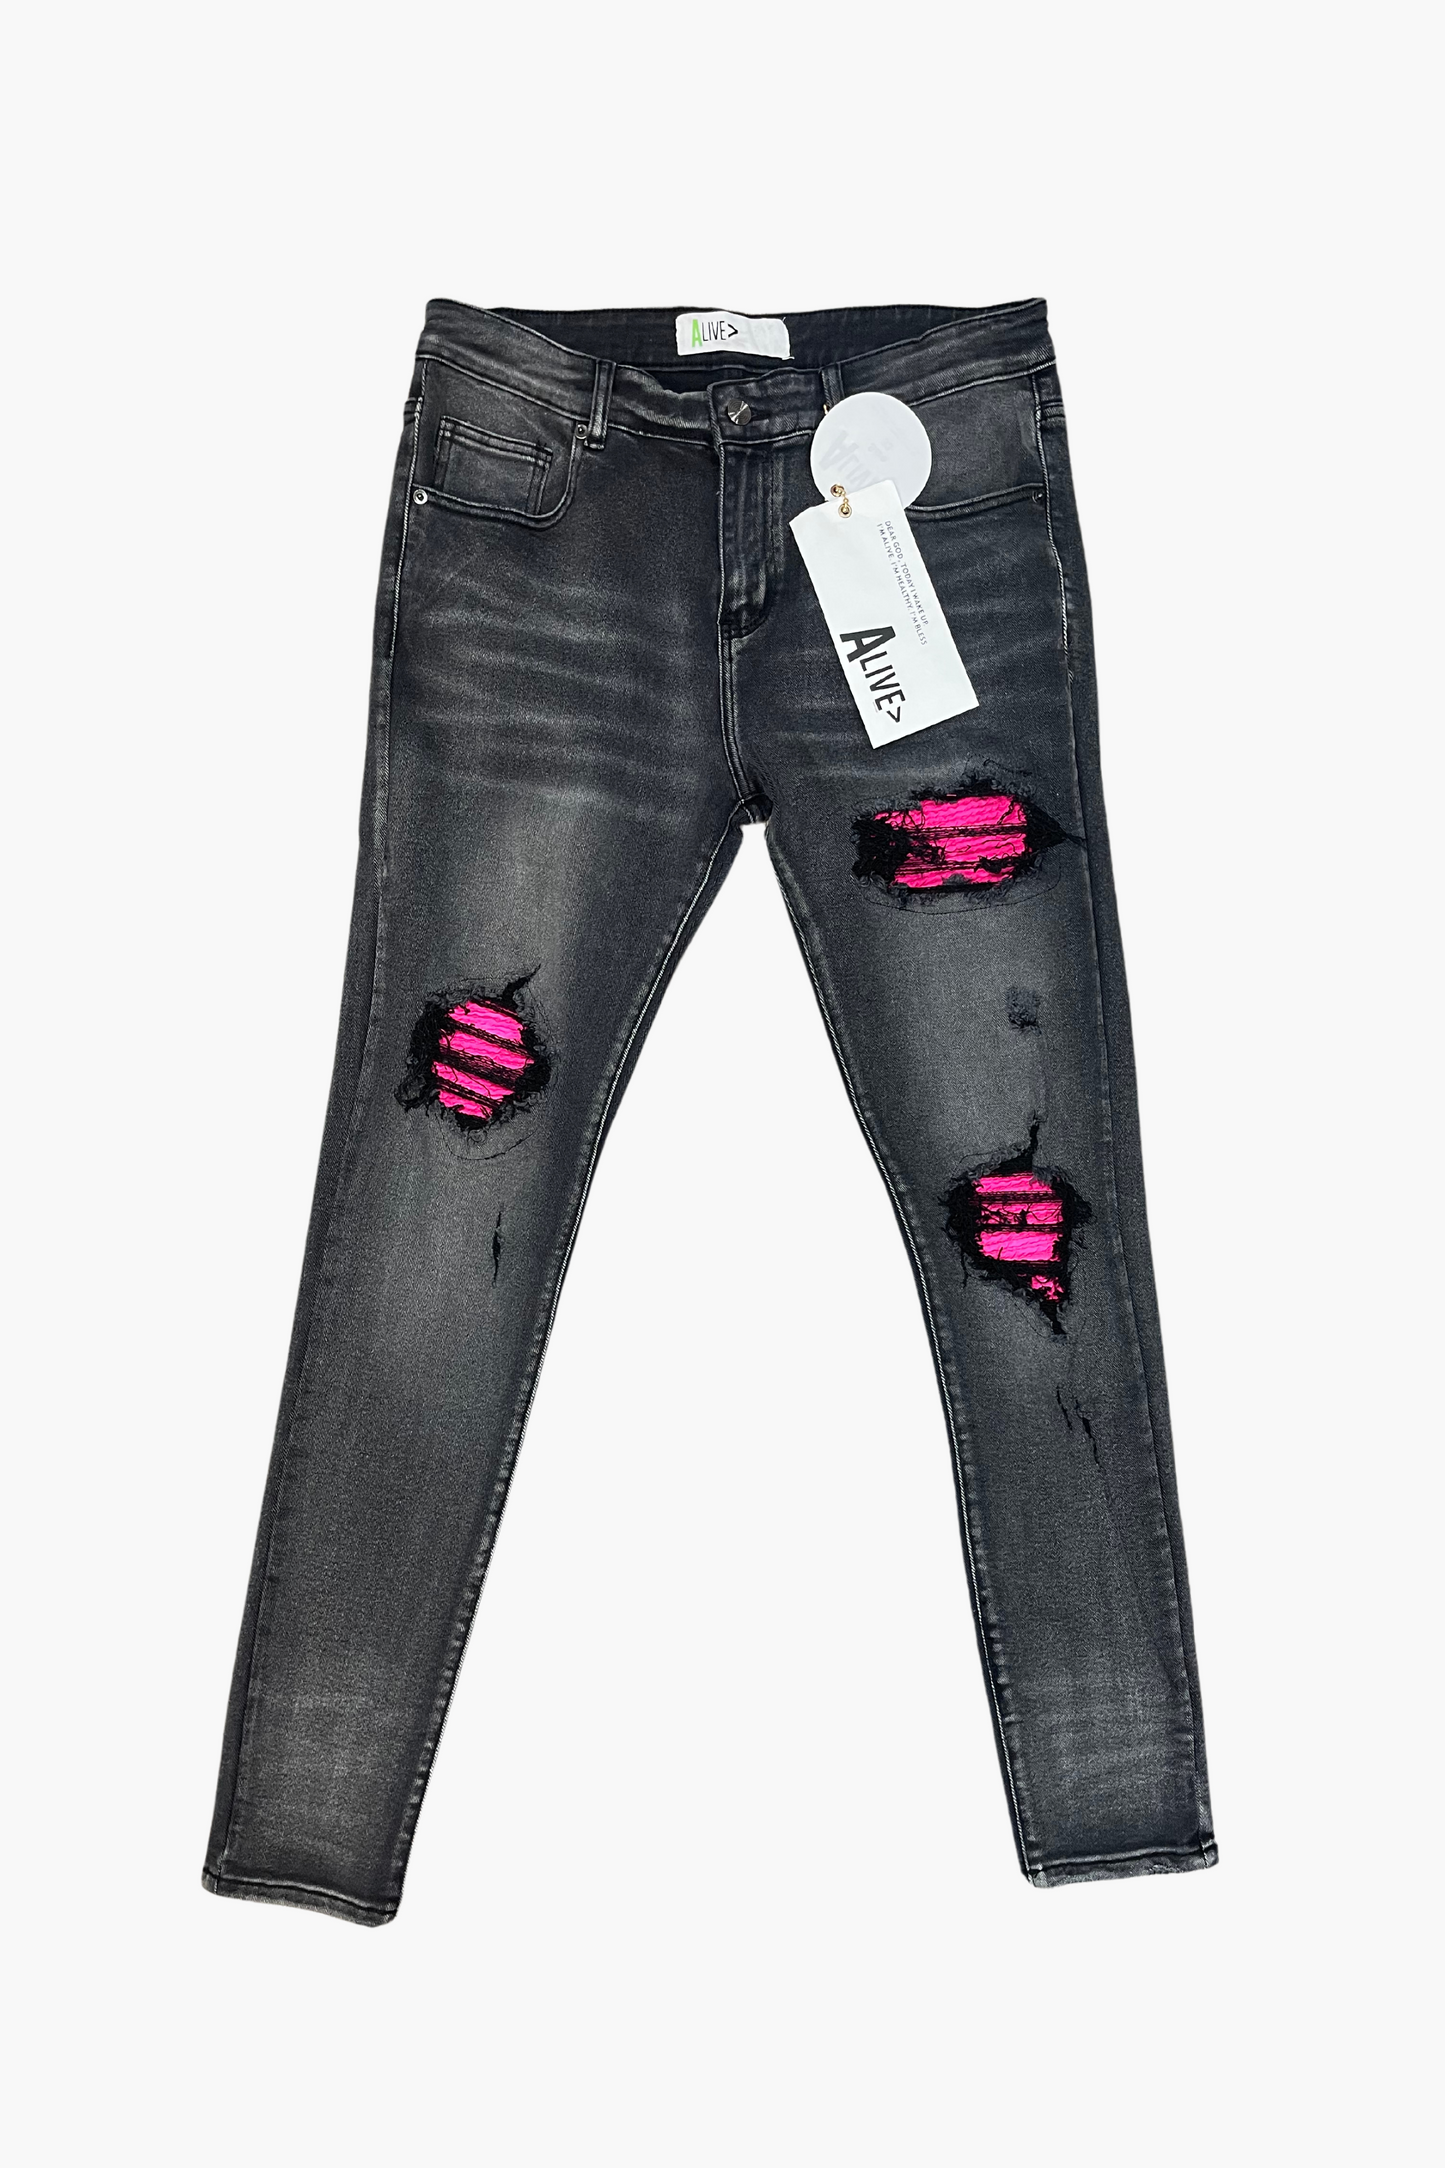 Alive Jeans Black with pink Patches